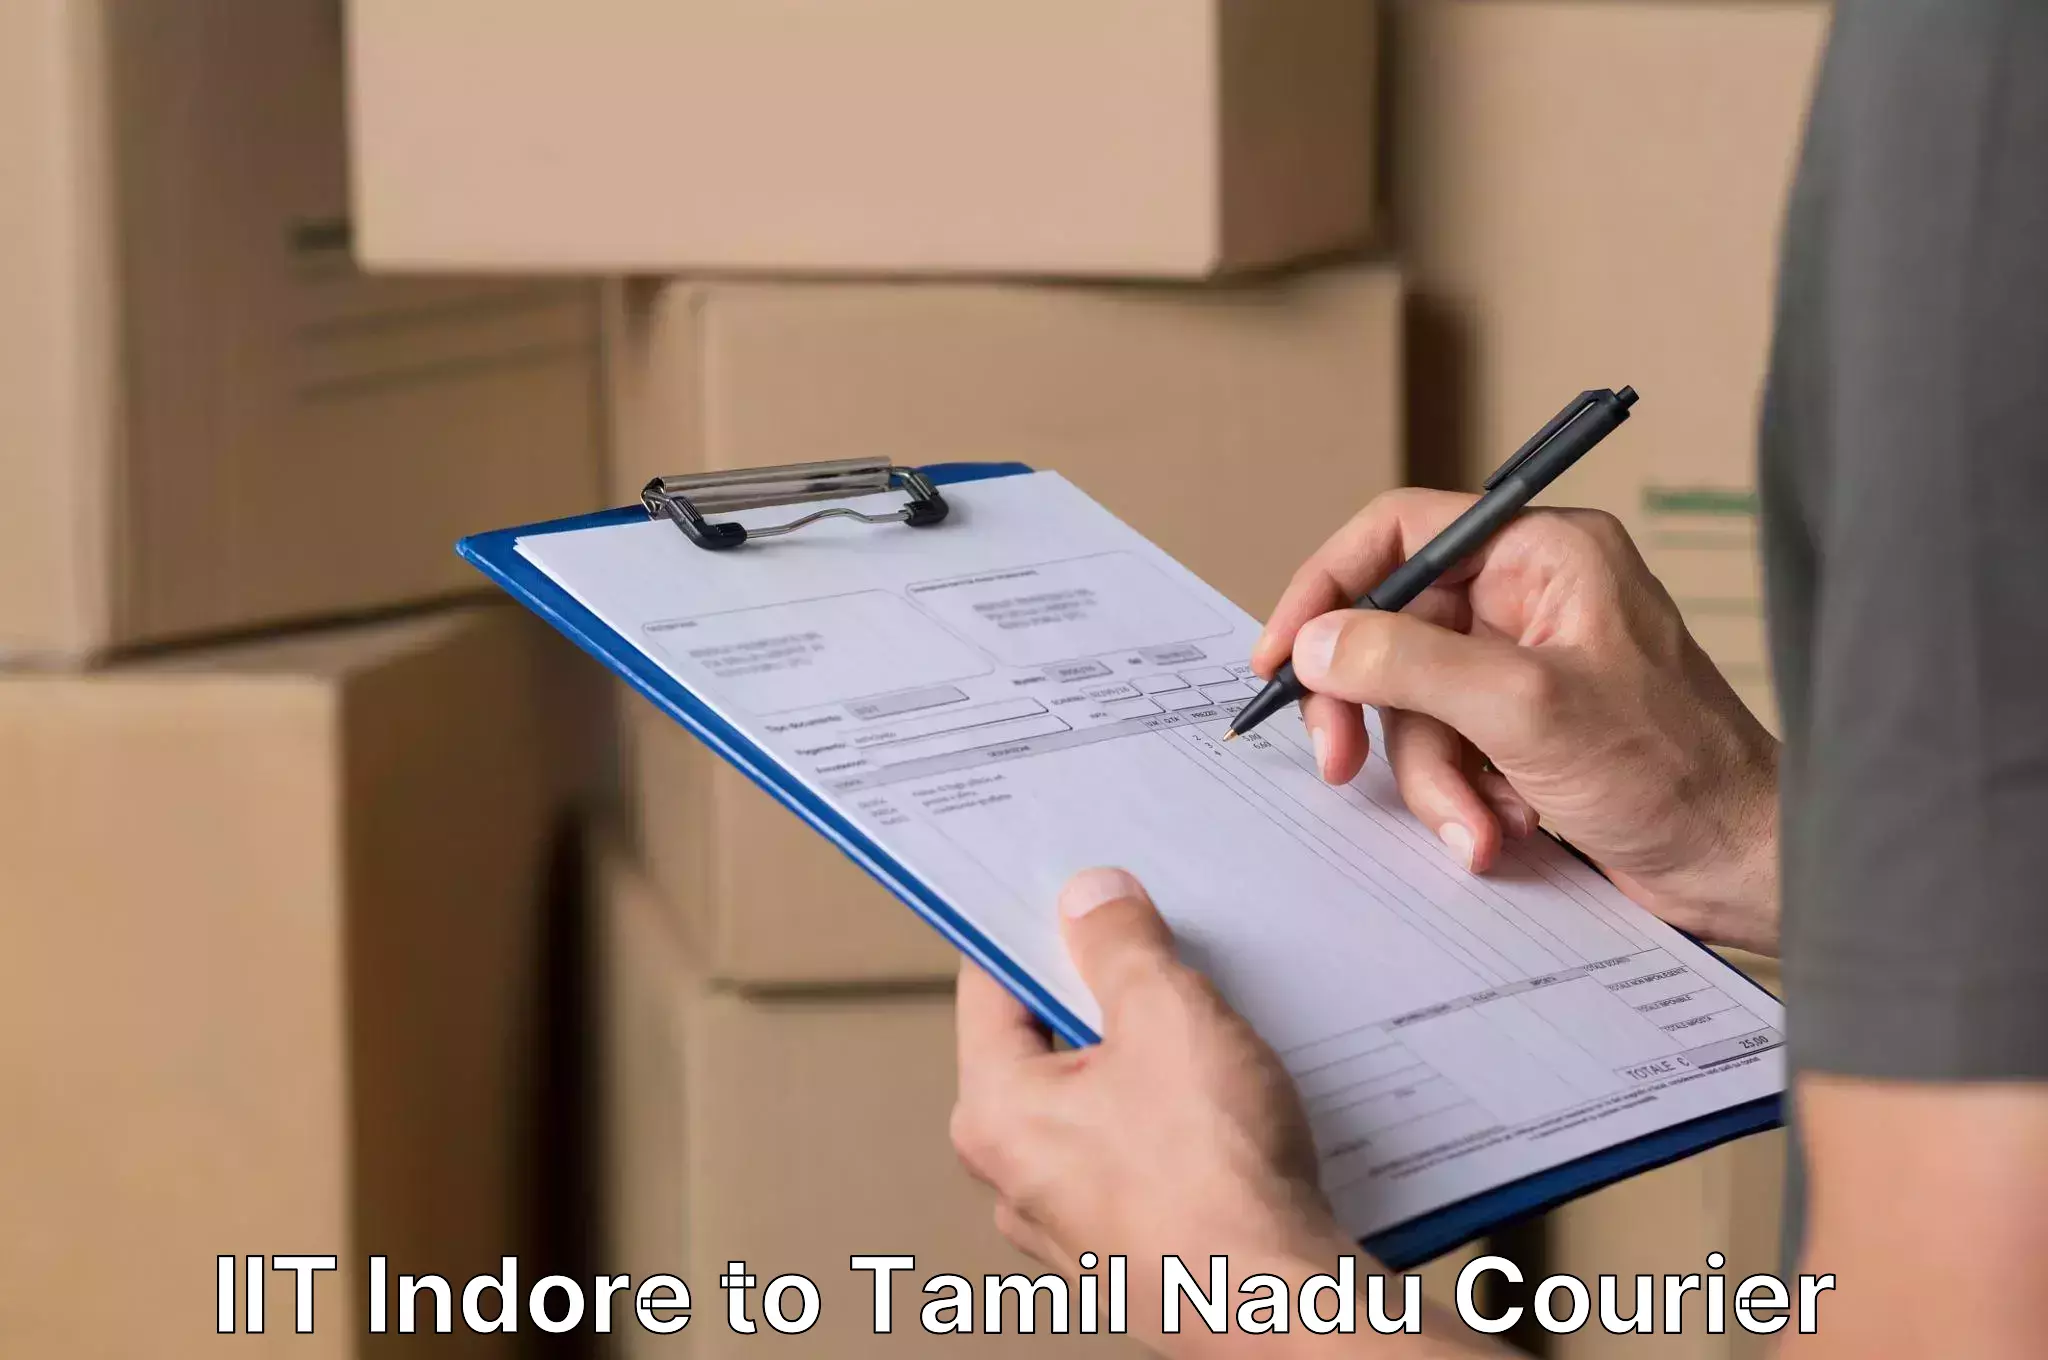 Professional packing services IIT Indore to Tamil Nadu